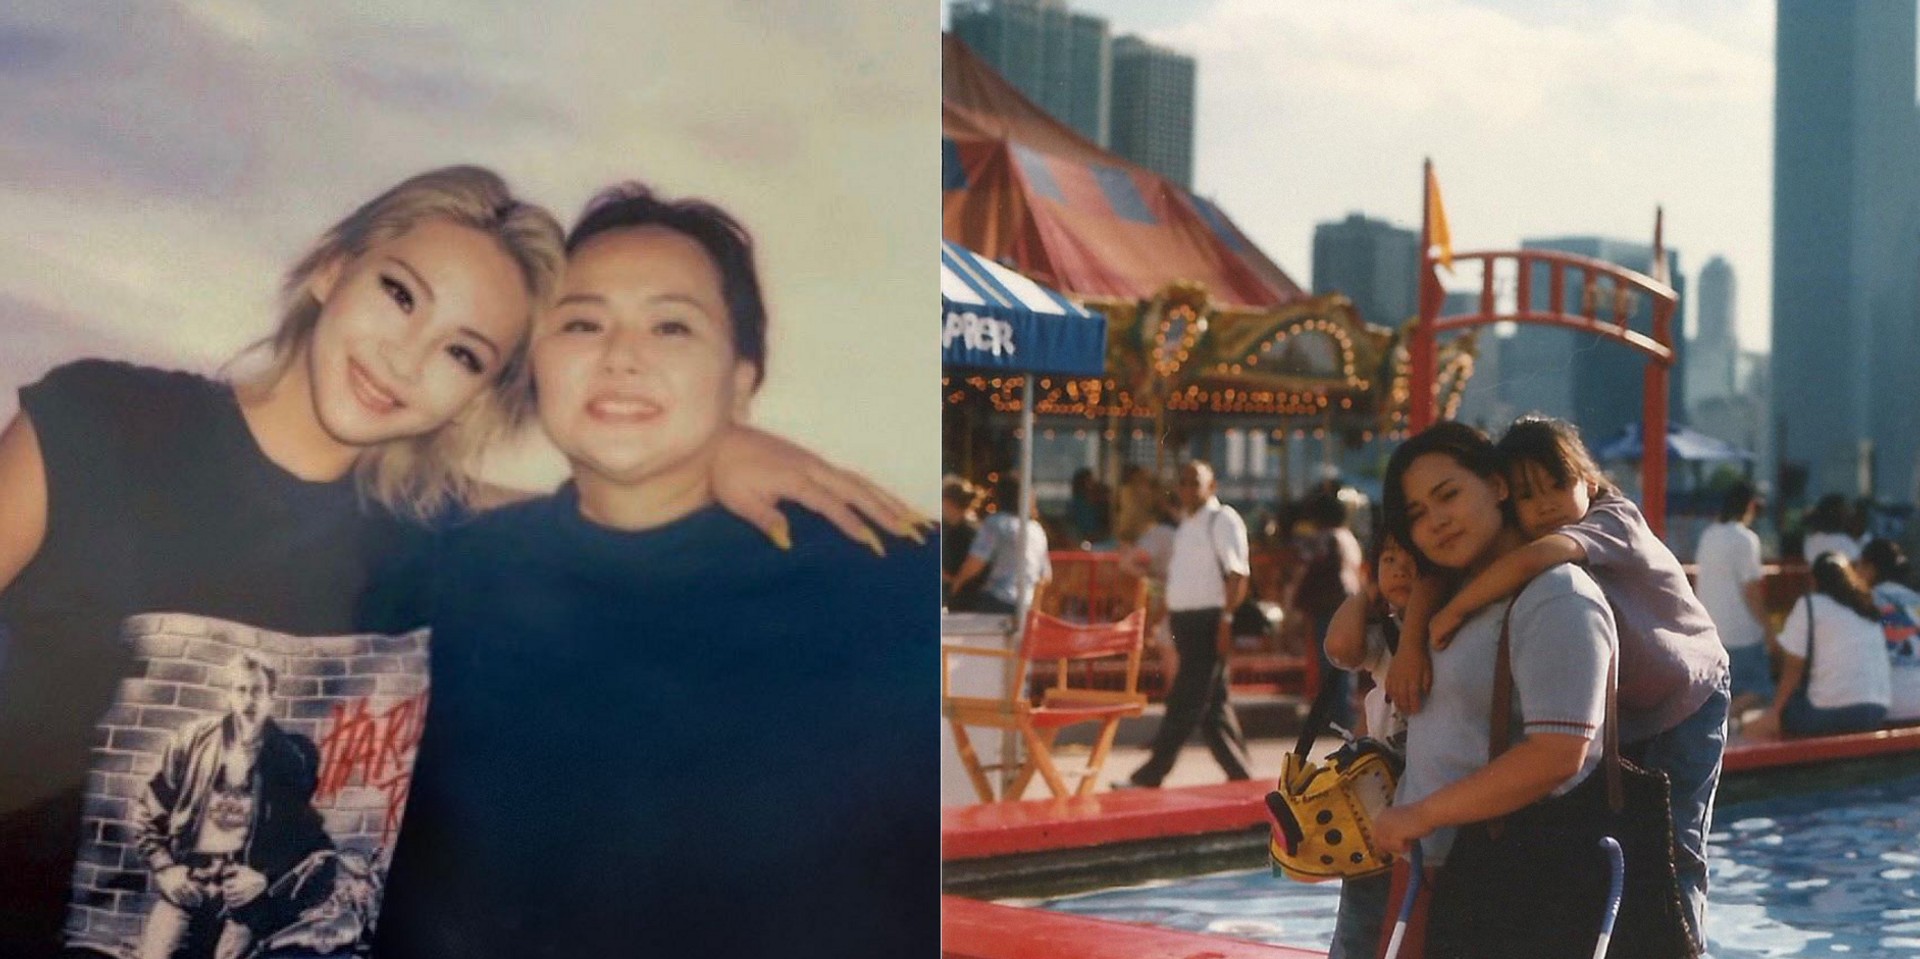 "If you love someone, tell them now." CL dedicates new single 'Wish You Were Here' to her late mother - listen